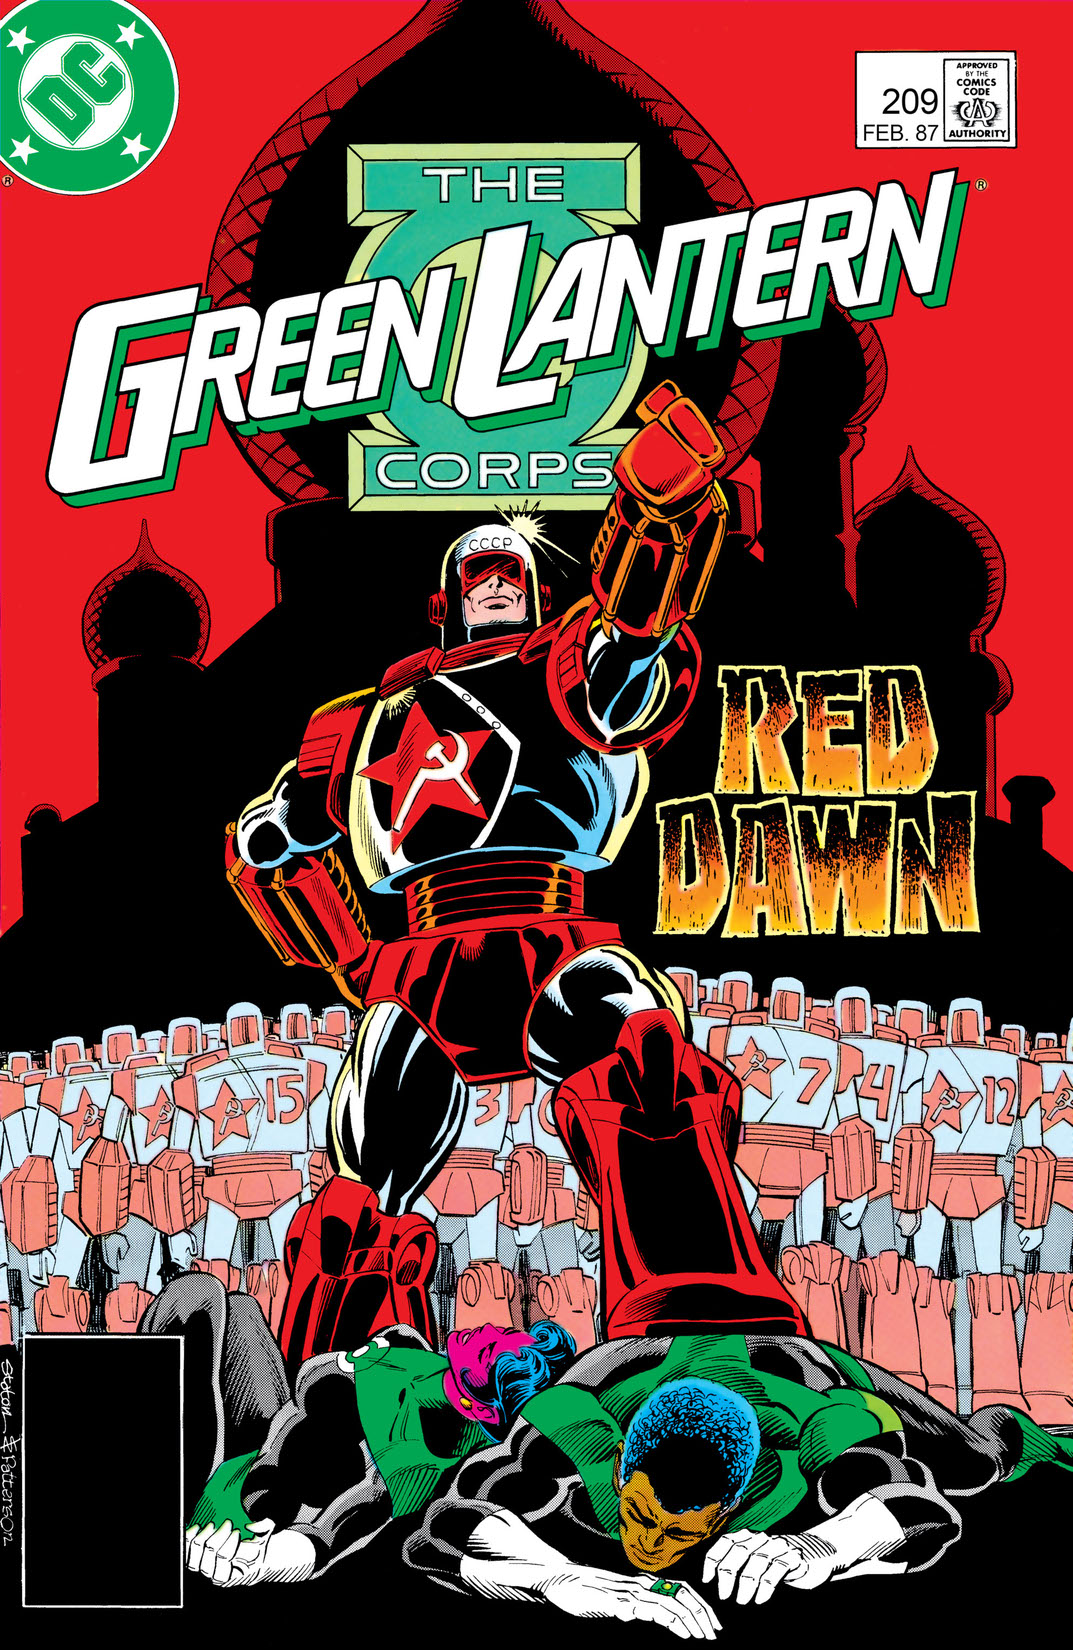 Green Lantern Corps (1986-) #209 preview images